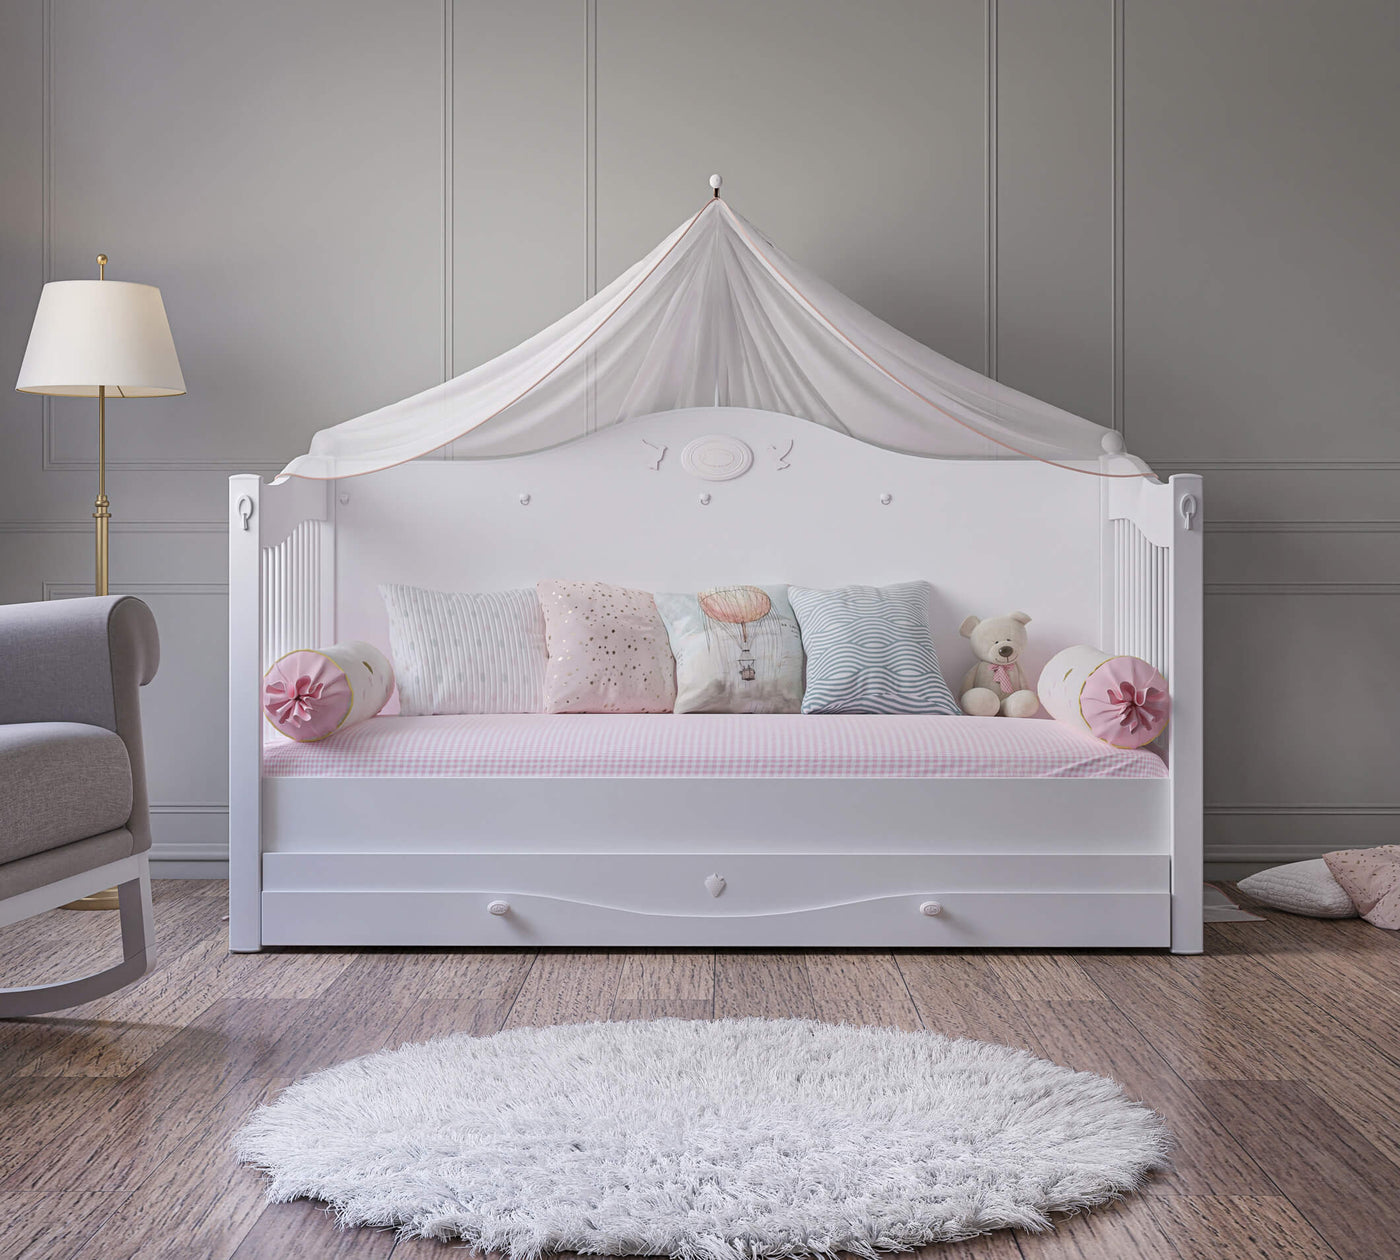 Rustic White Convertible Baby Bed (80x180 cm)